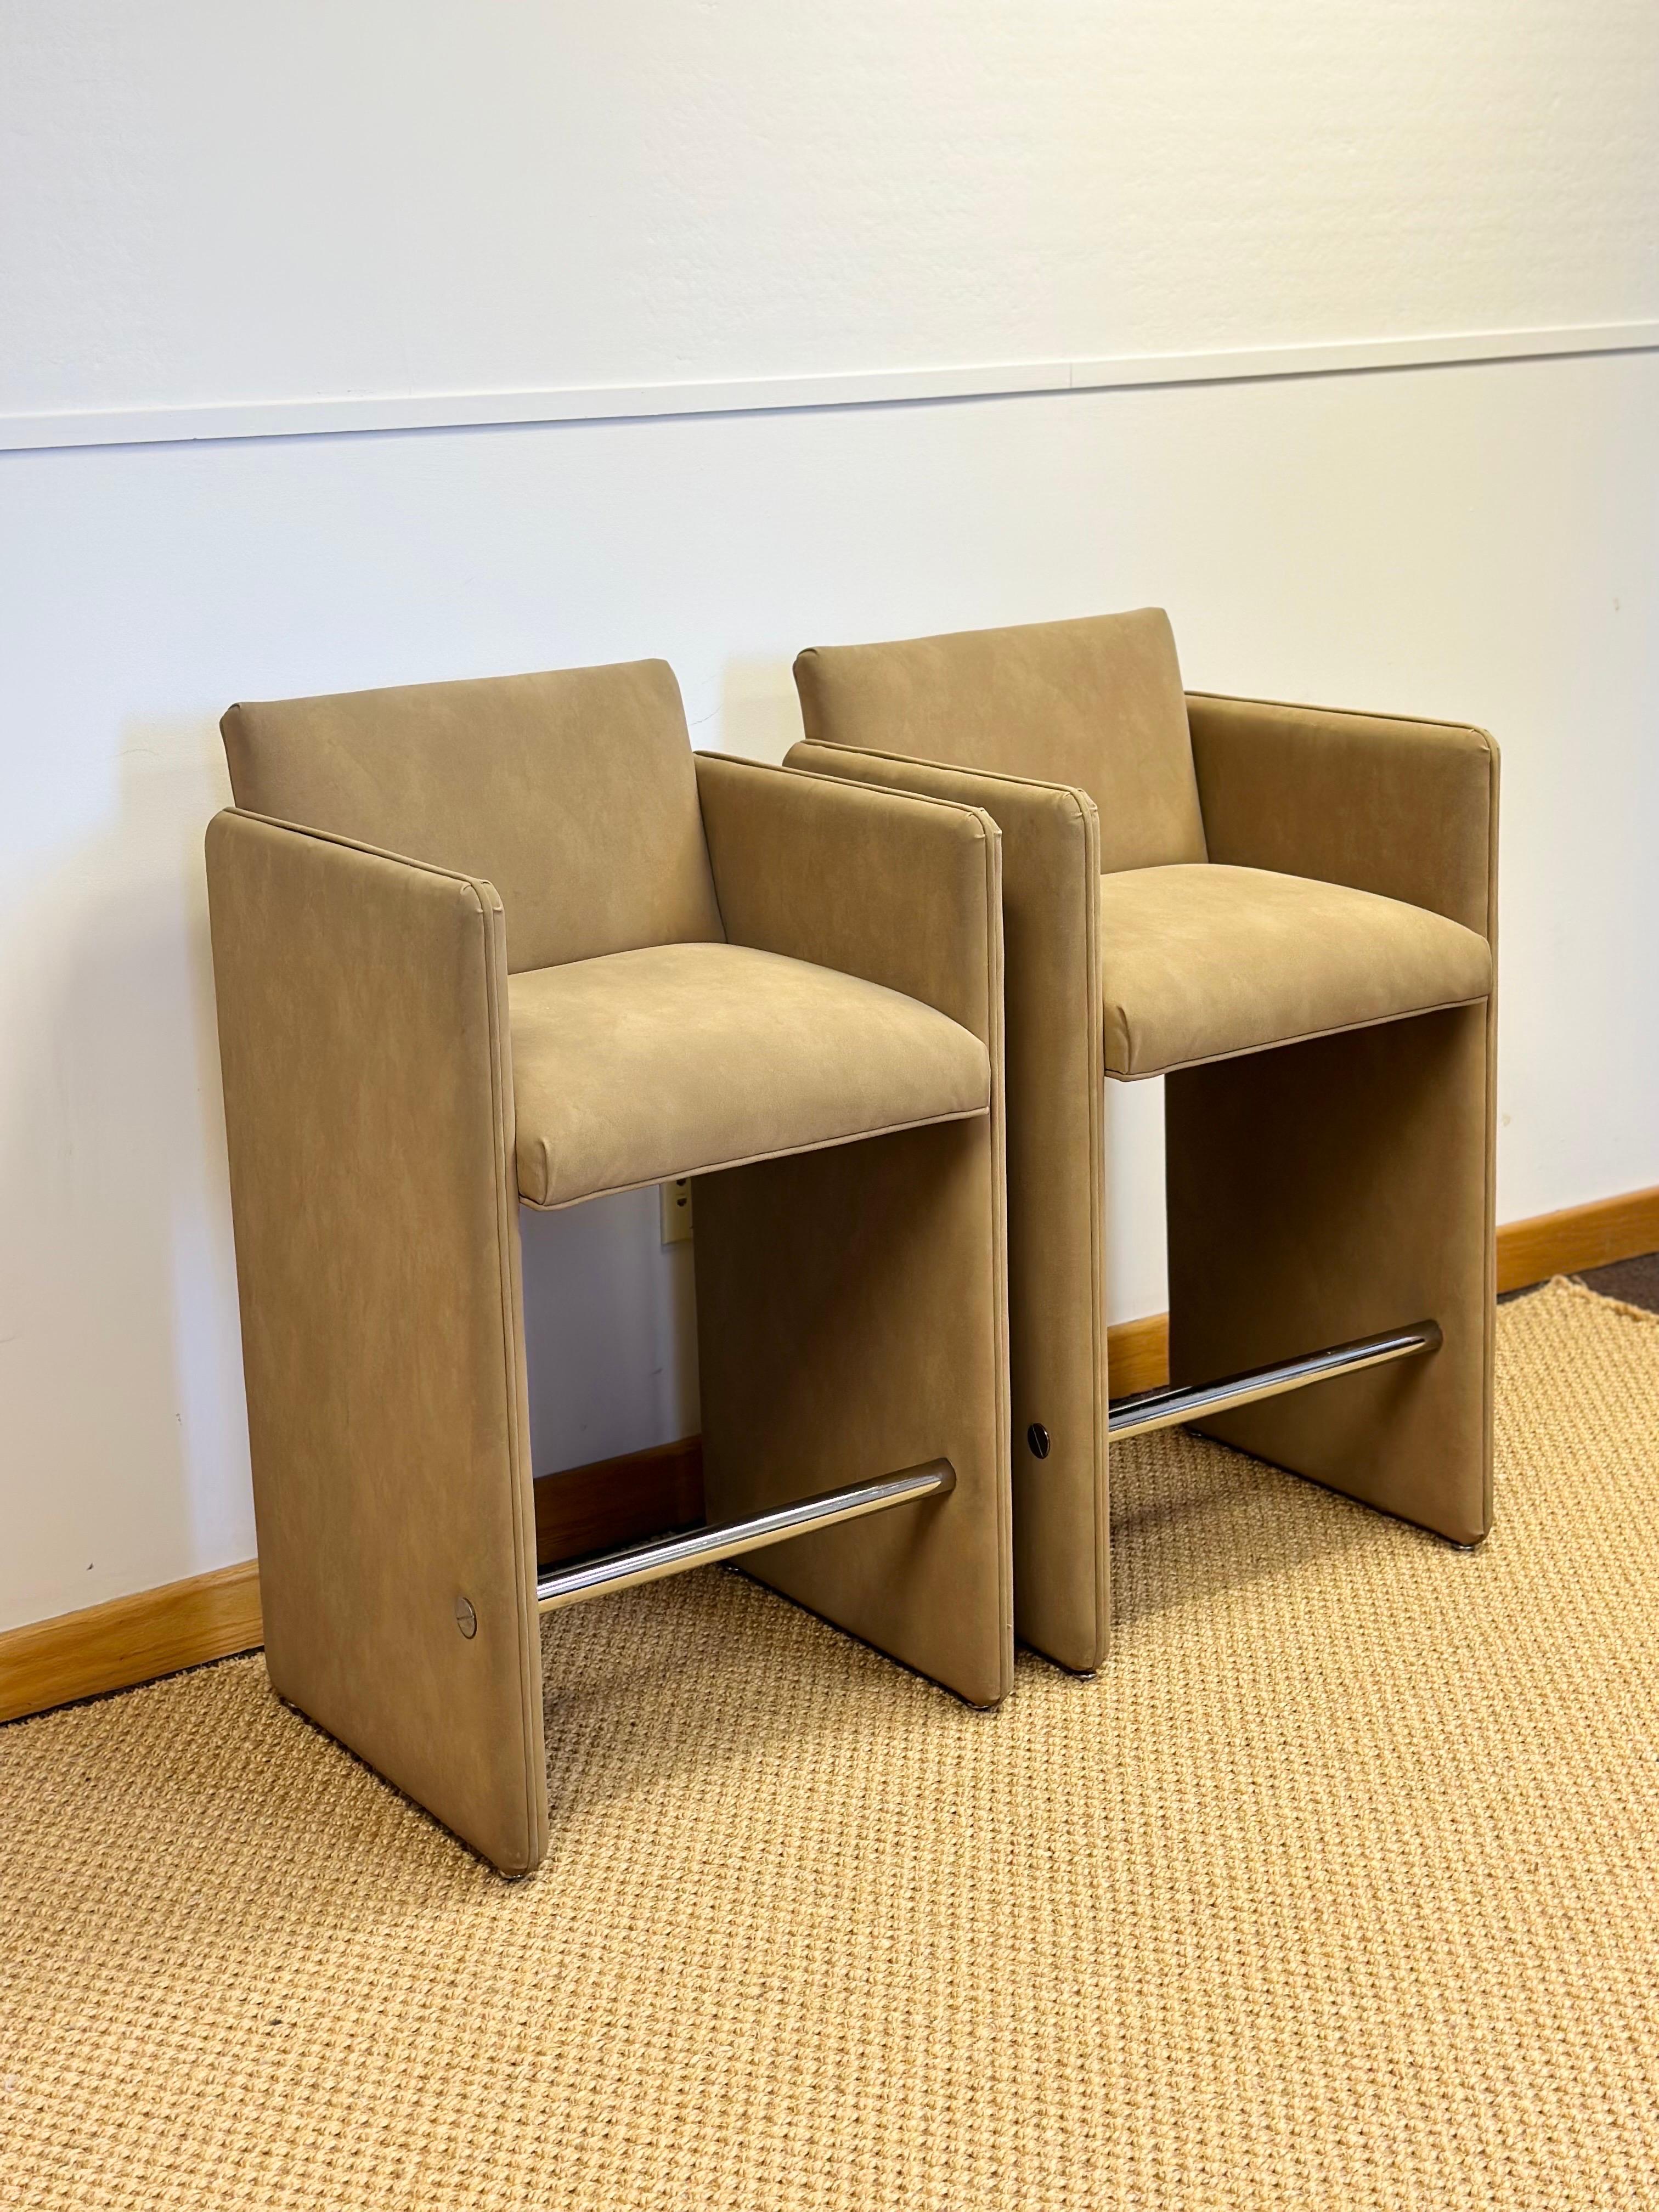 Late 20th Century 1980s Sculptural Italian Postmodern Faux Tan Suede Bar Stools – a Pair  For Sale